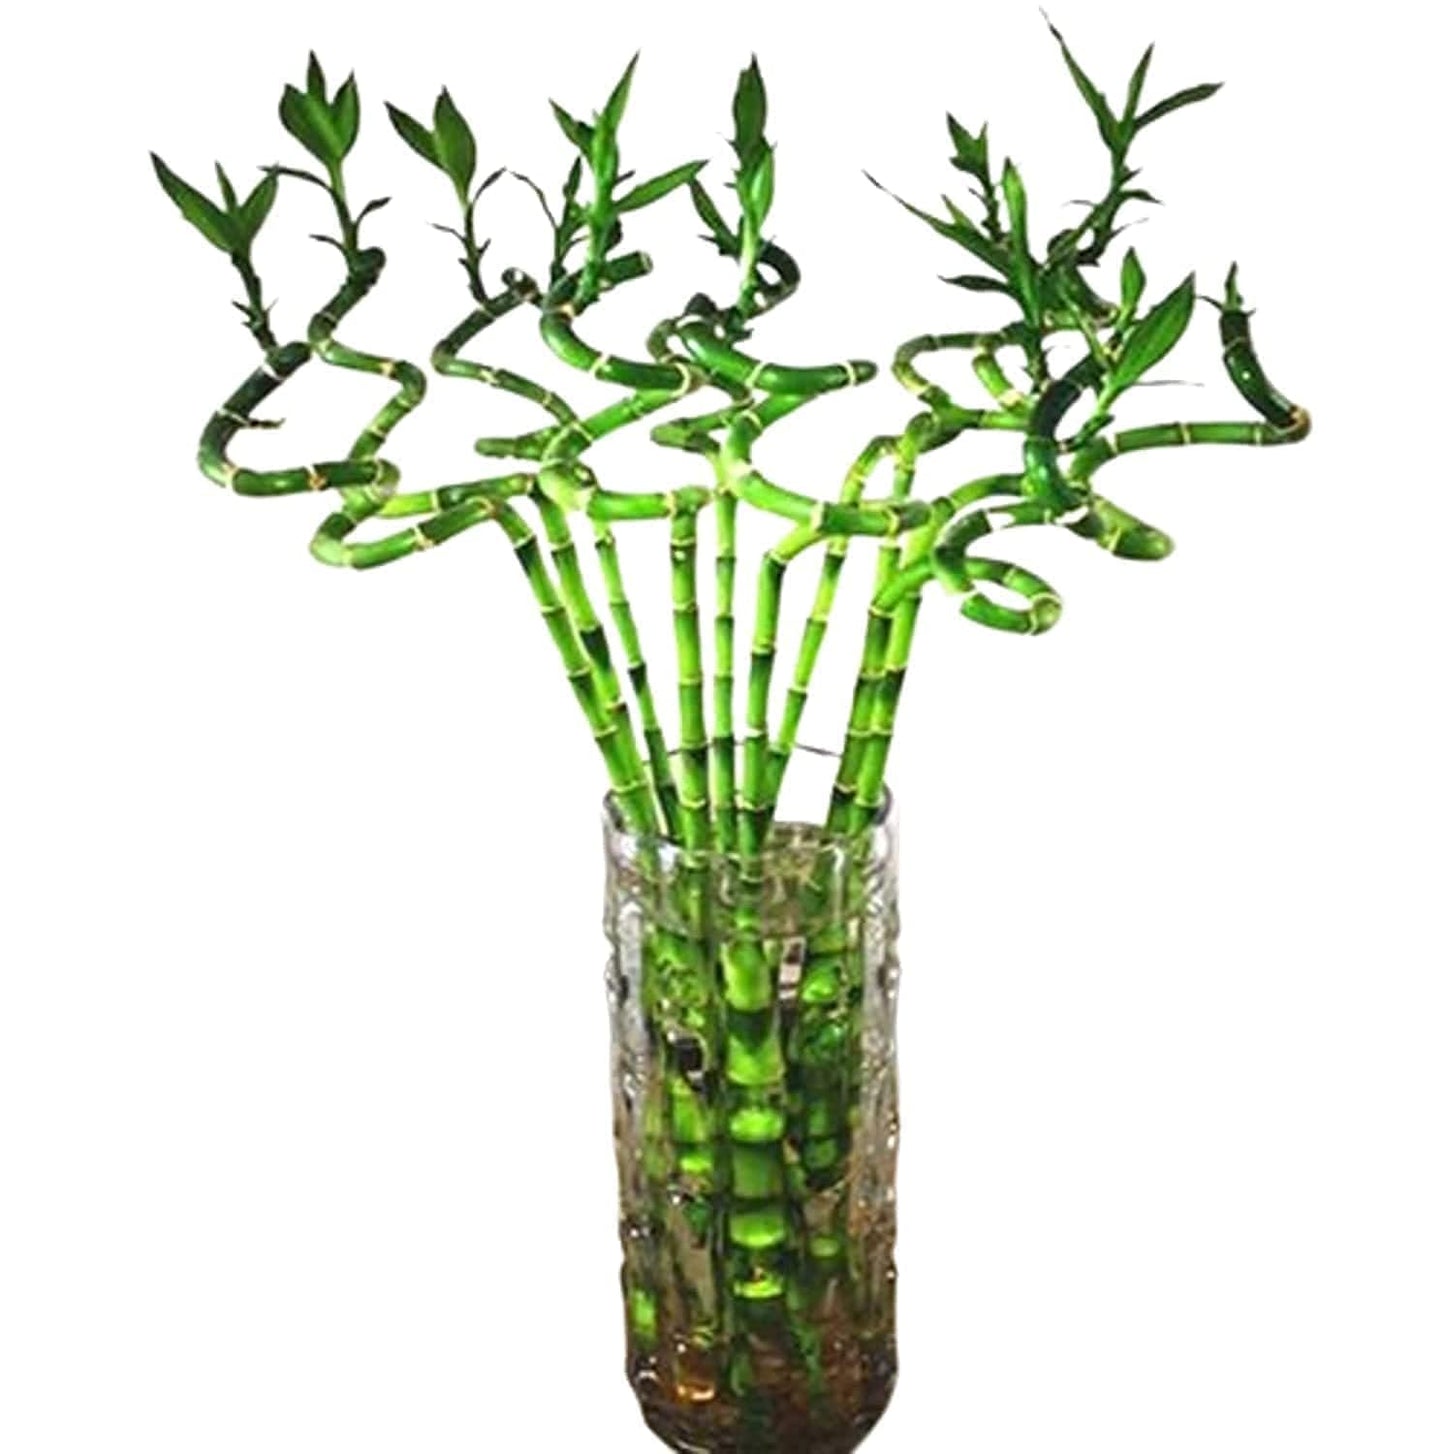 Lucky Bamboo Dancing Sticks Indoor Plant (6 sticks) for Living Room, Table Corner, Home, Office Decoration